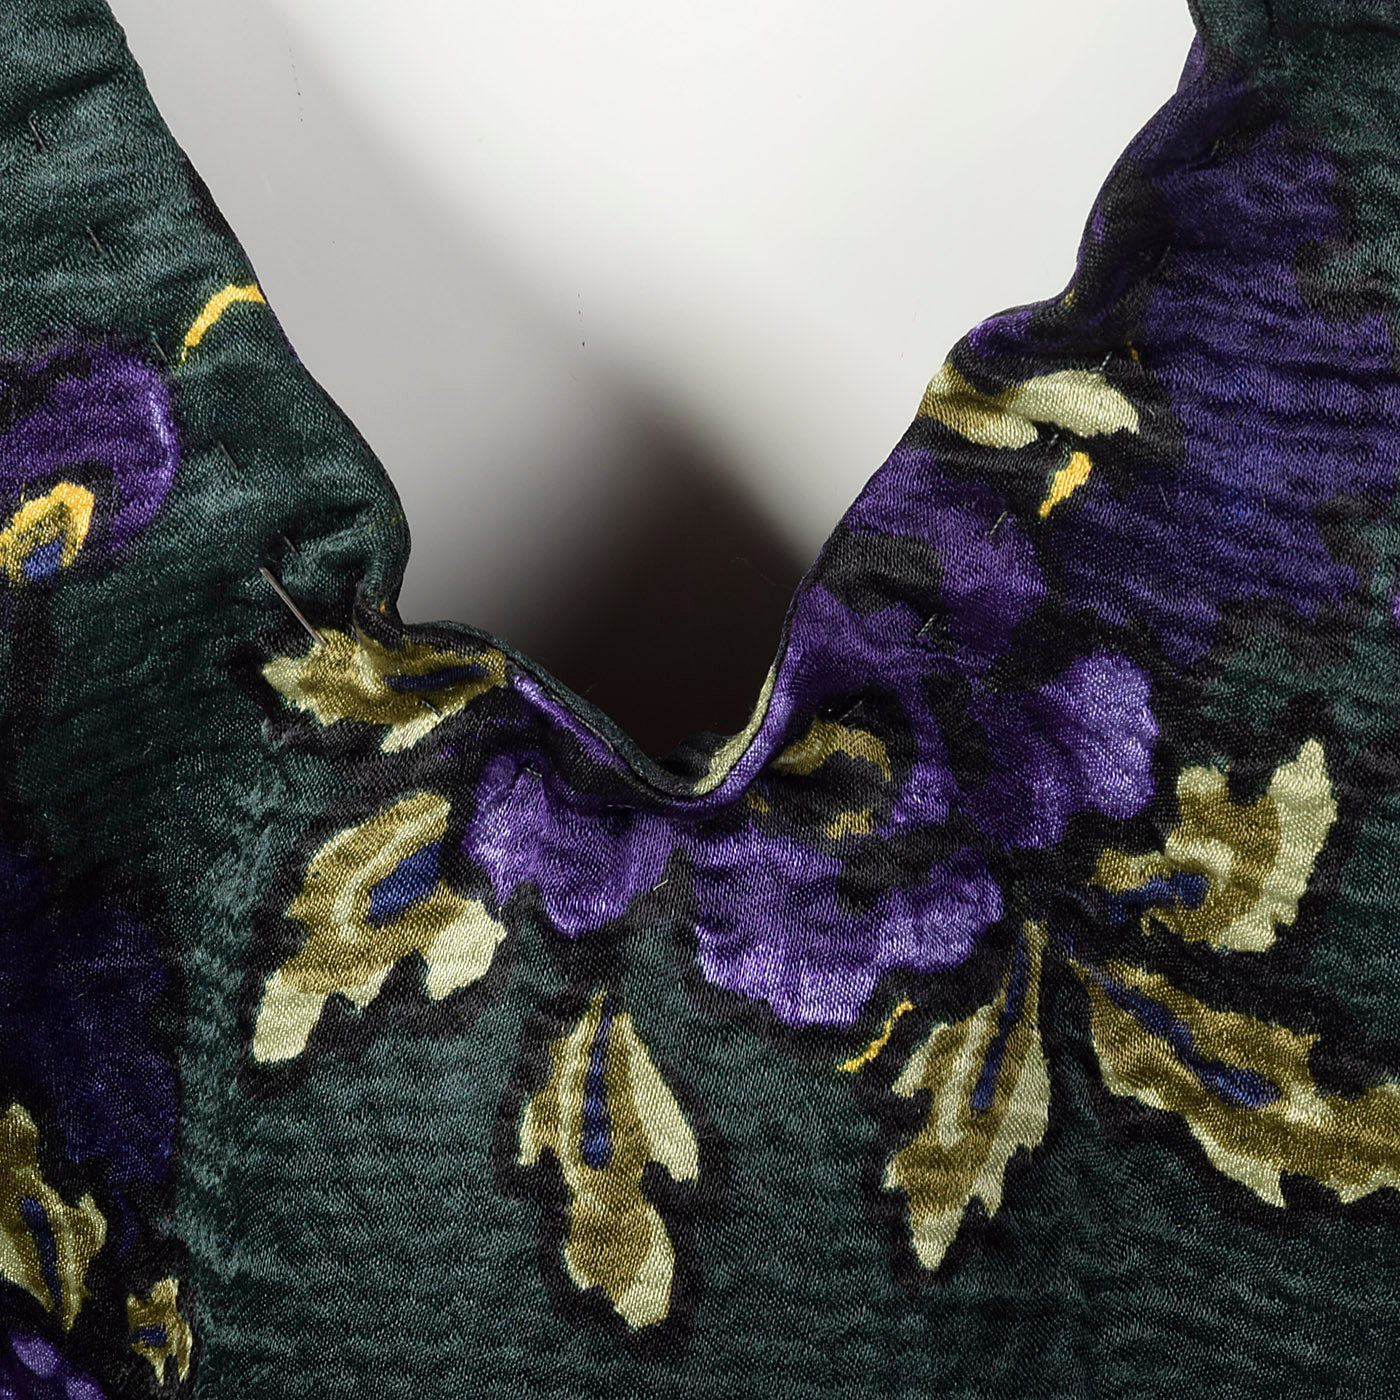 2010s Marni Green Silk and Wool Floral Top